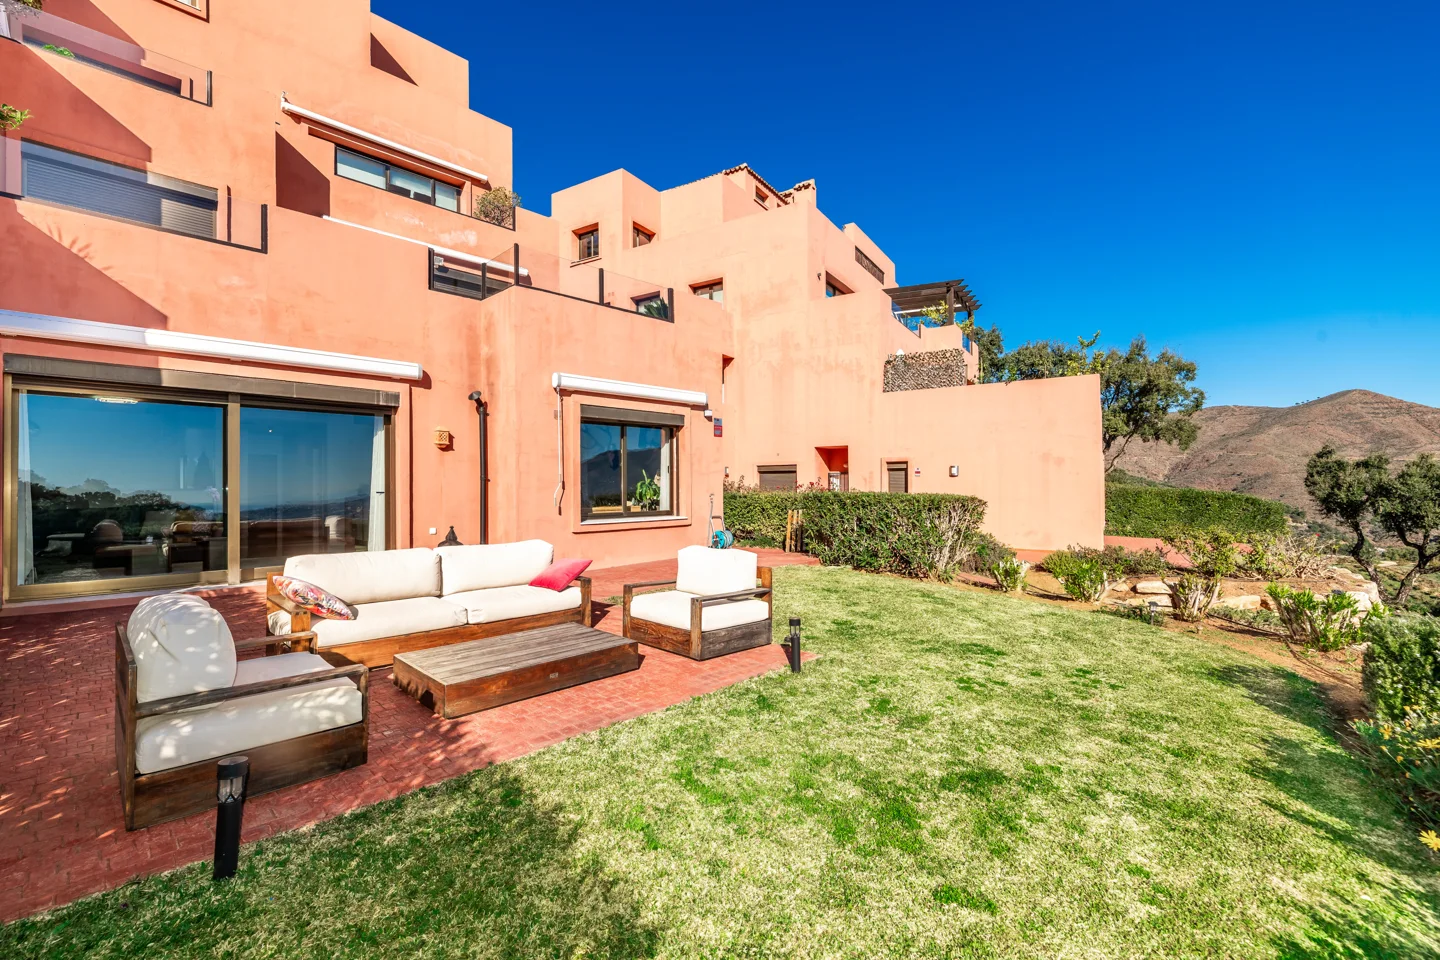 Beautiful 3 bedroom apartment in La Mairena with lovely views